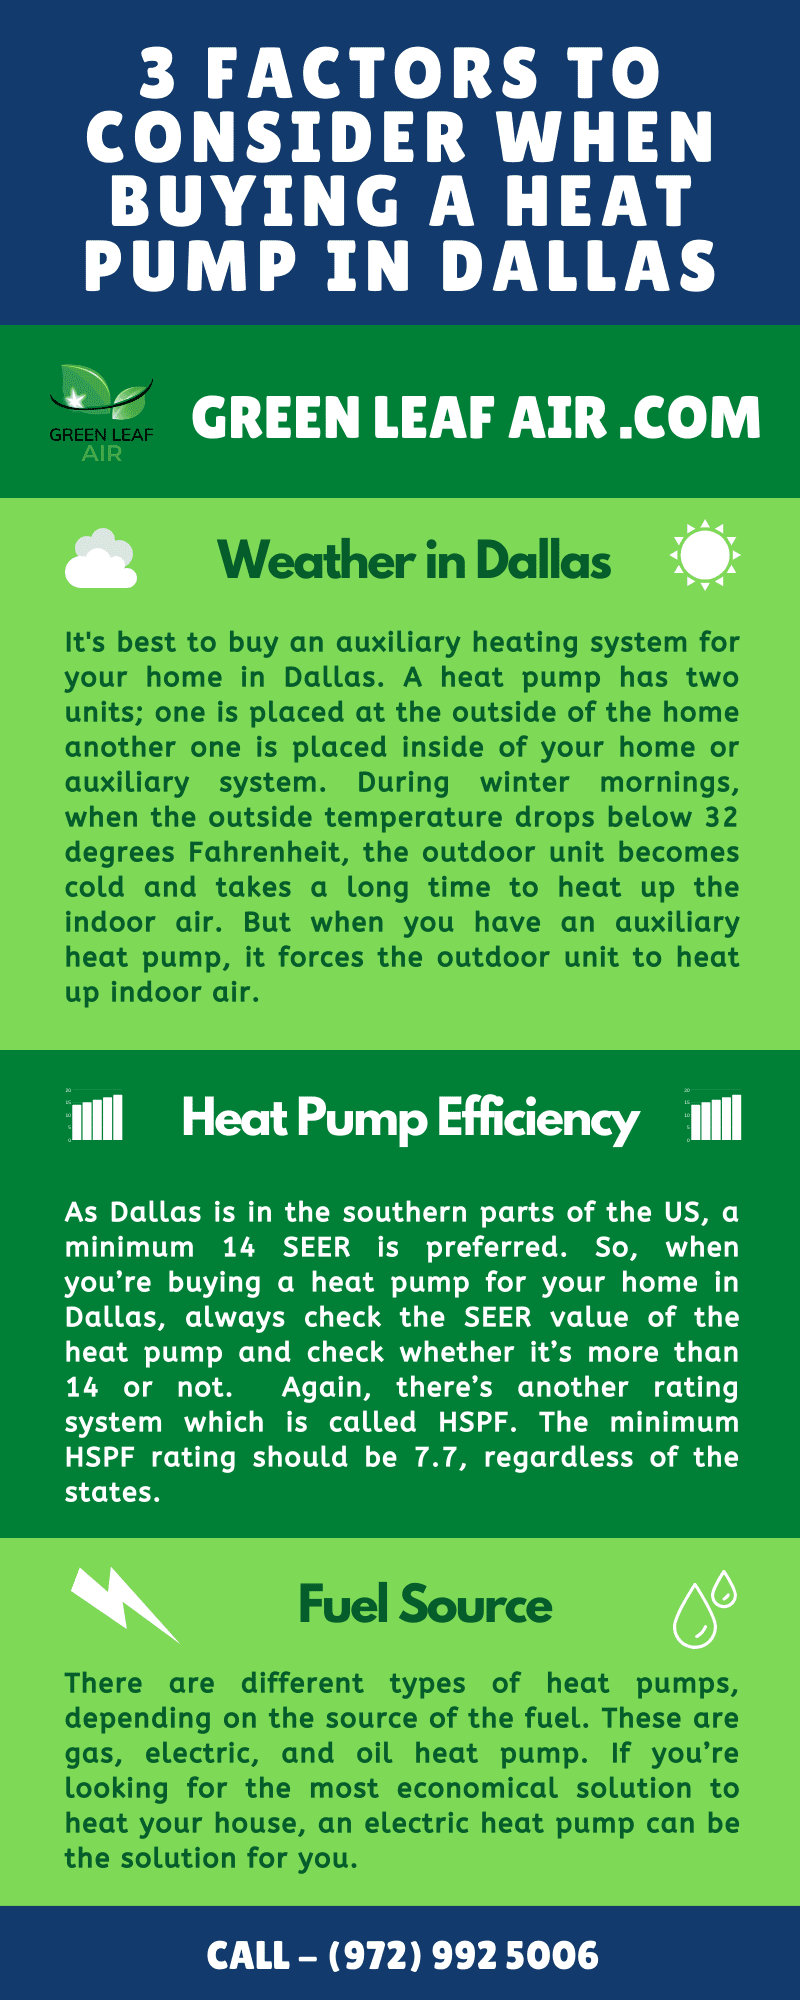 3 Factors To Consider When Buying a Heat Pump in Dallas